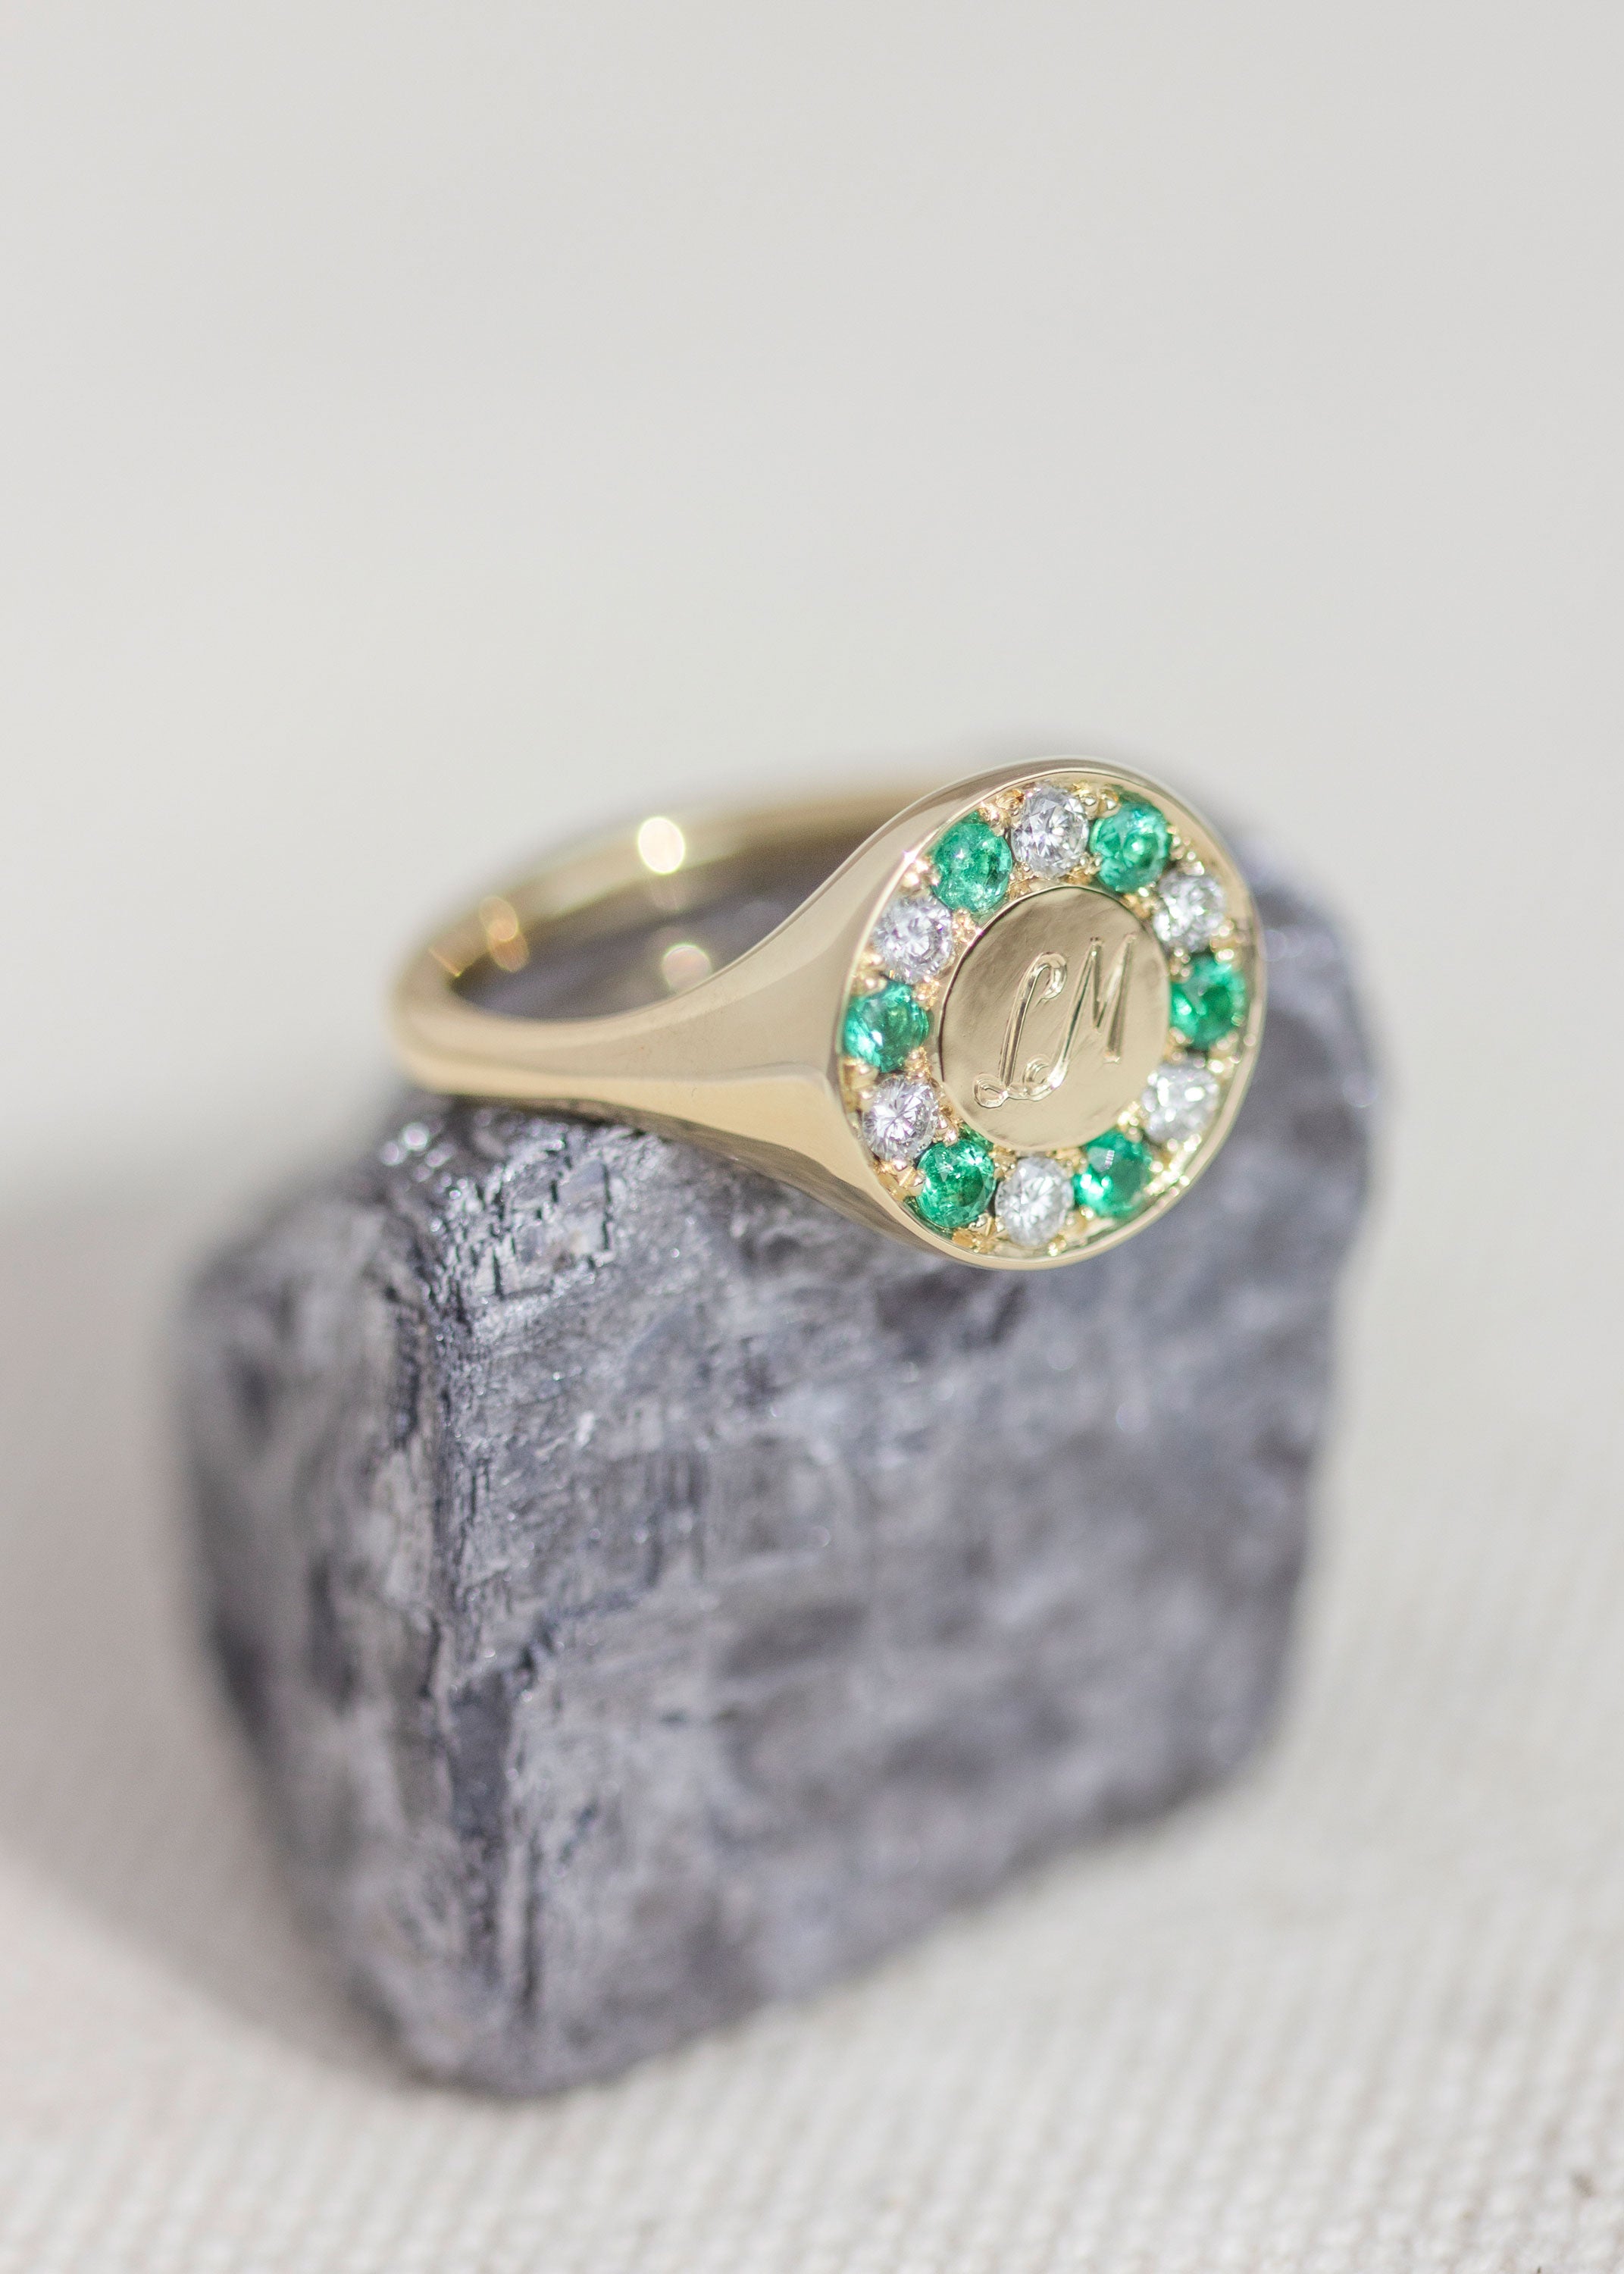 Halo Signet Ring with Emeralds and Diamonds